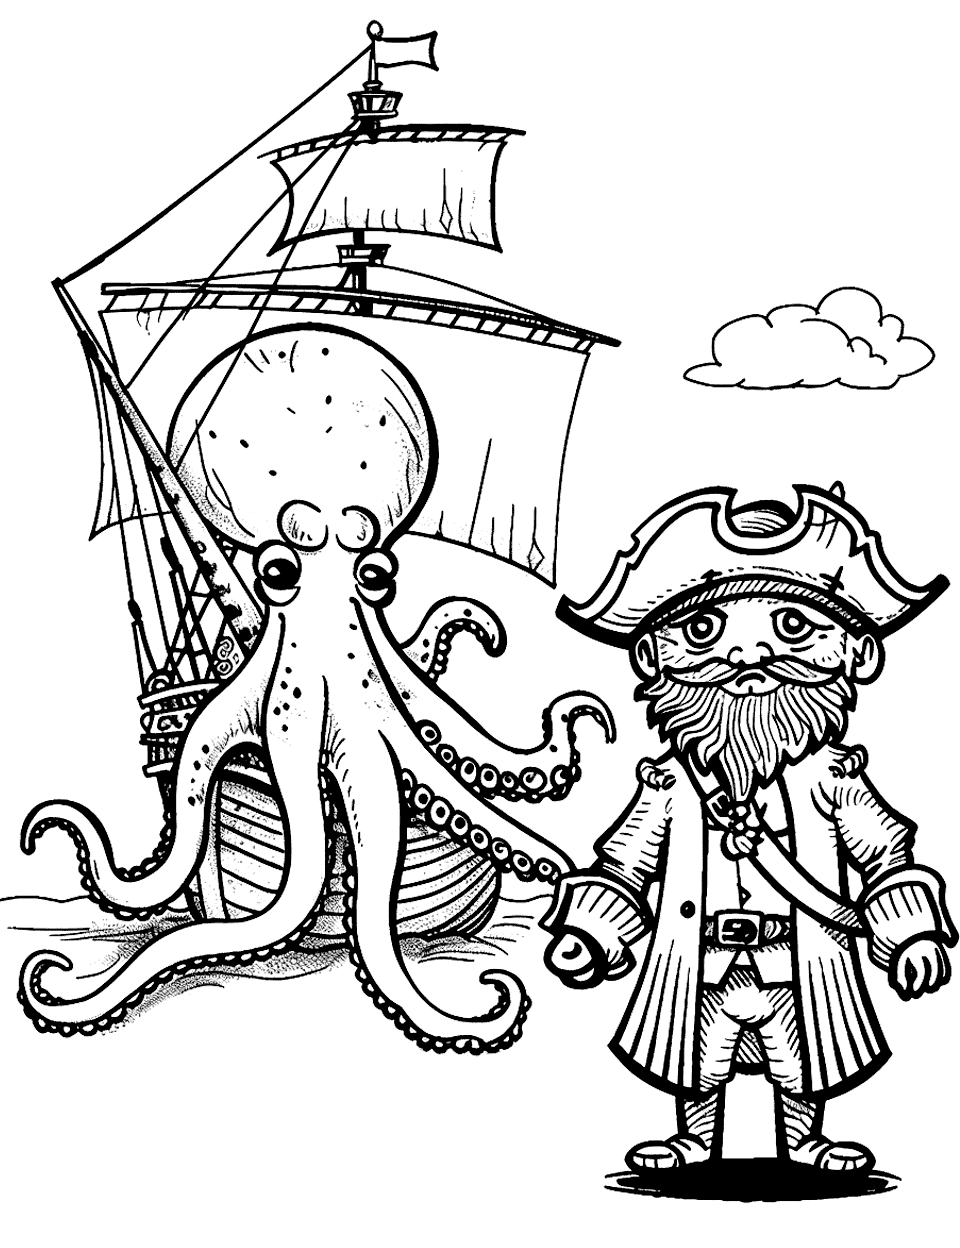 Pirate and the Giant Octopus Coloring Page - A pirate standing near his ship after a giant octopus has taken over it.